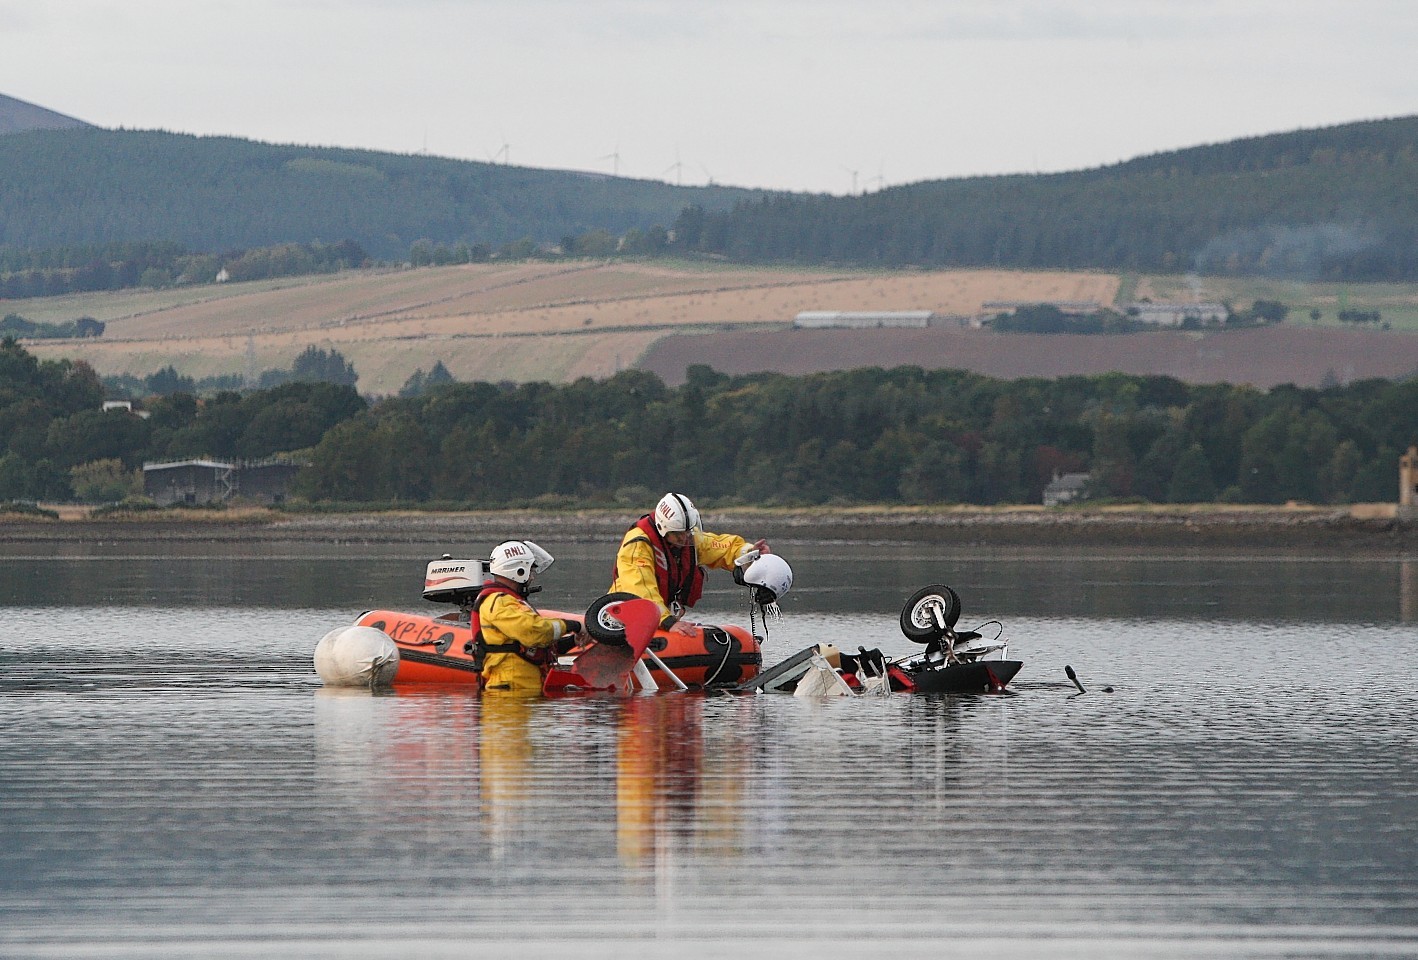 The wreckage of the microlight slowly sinking into the Cromarty Firth